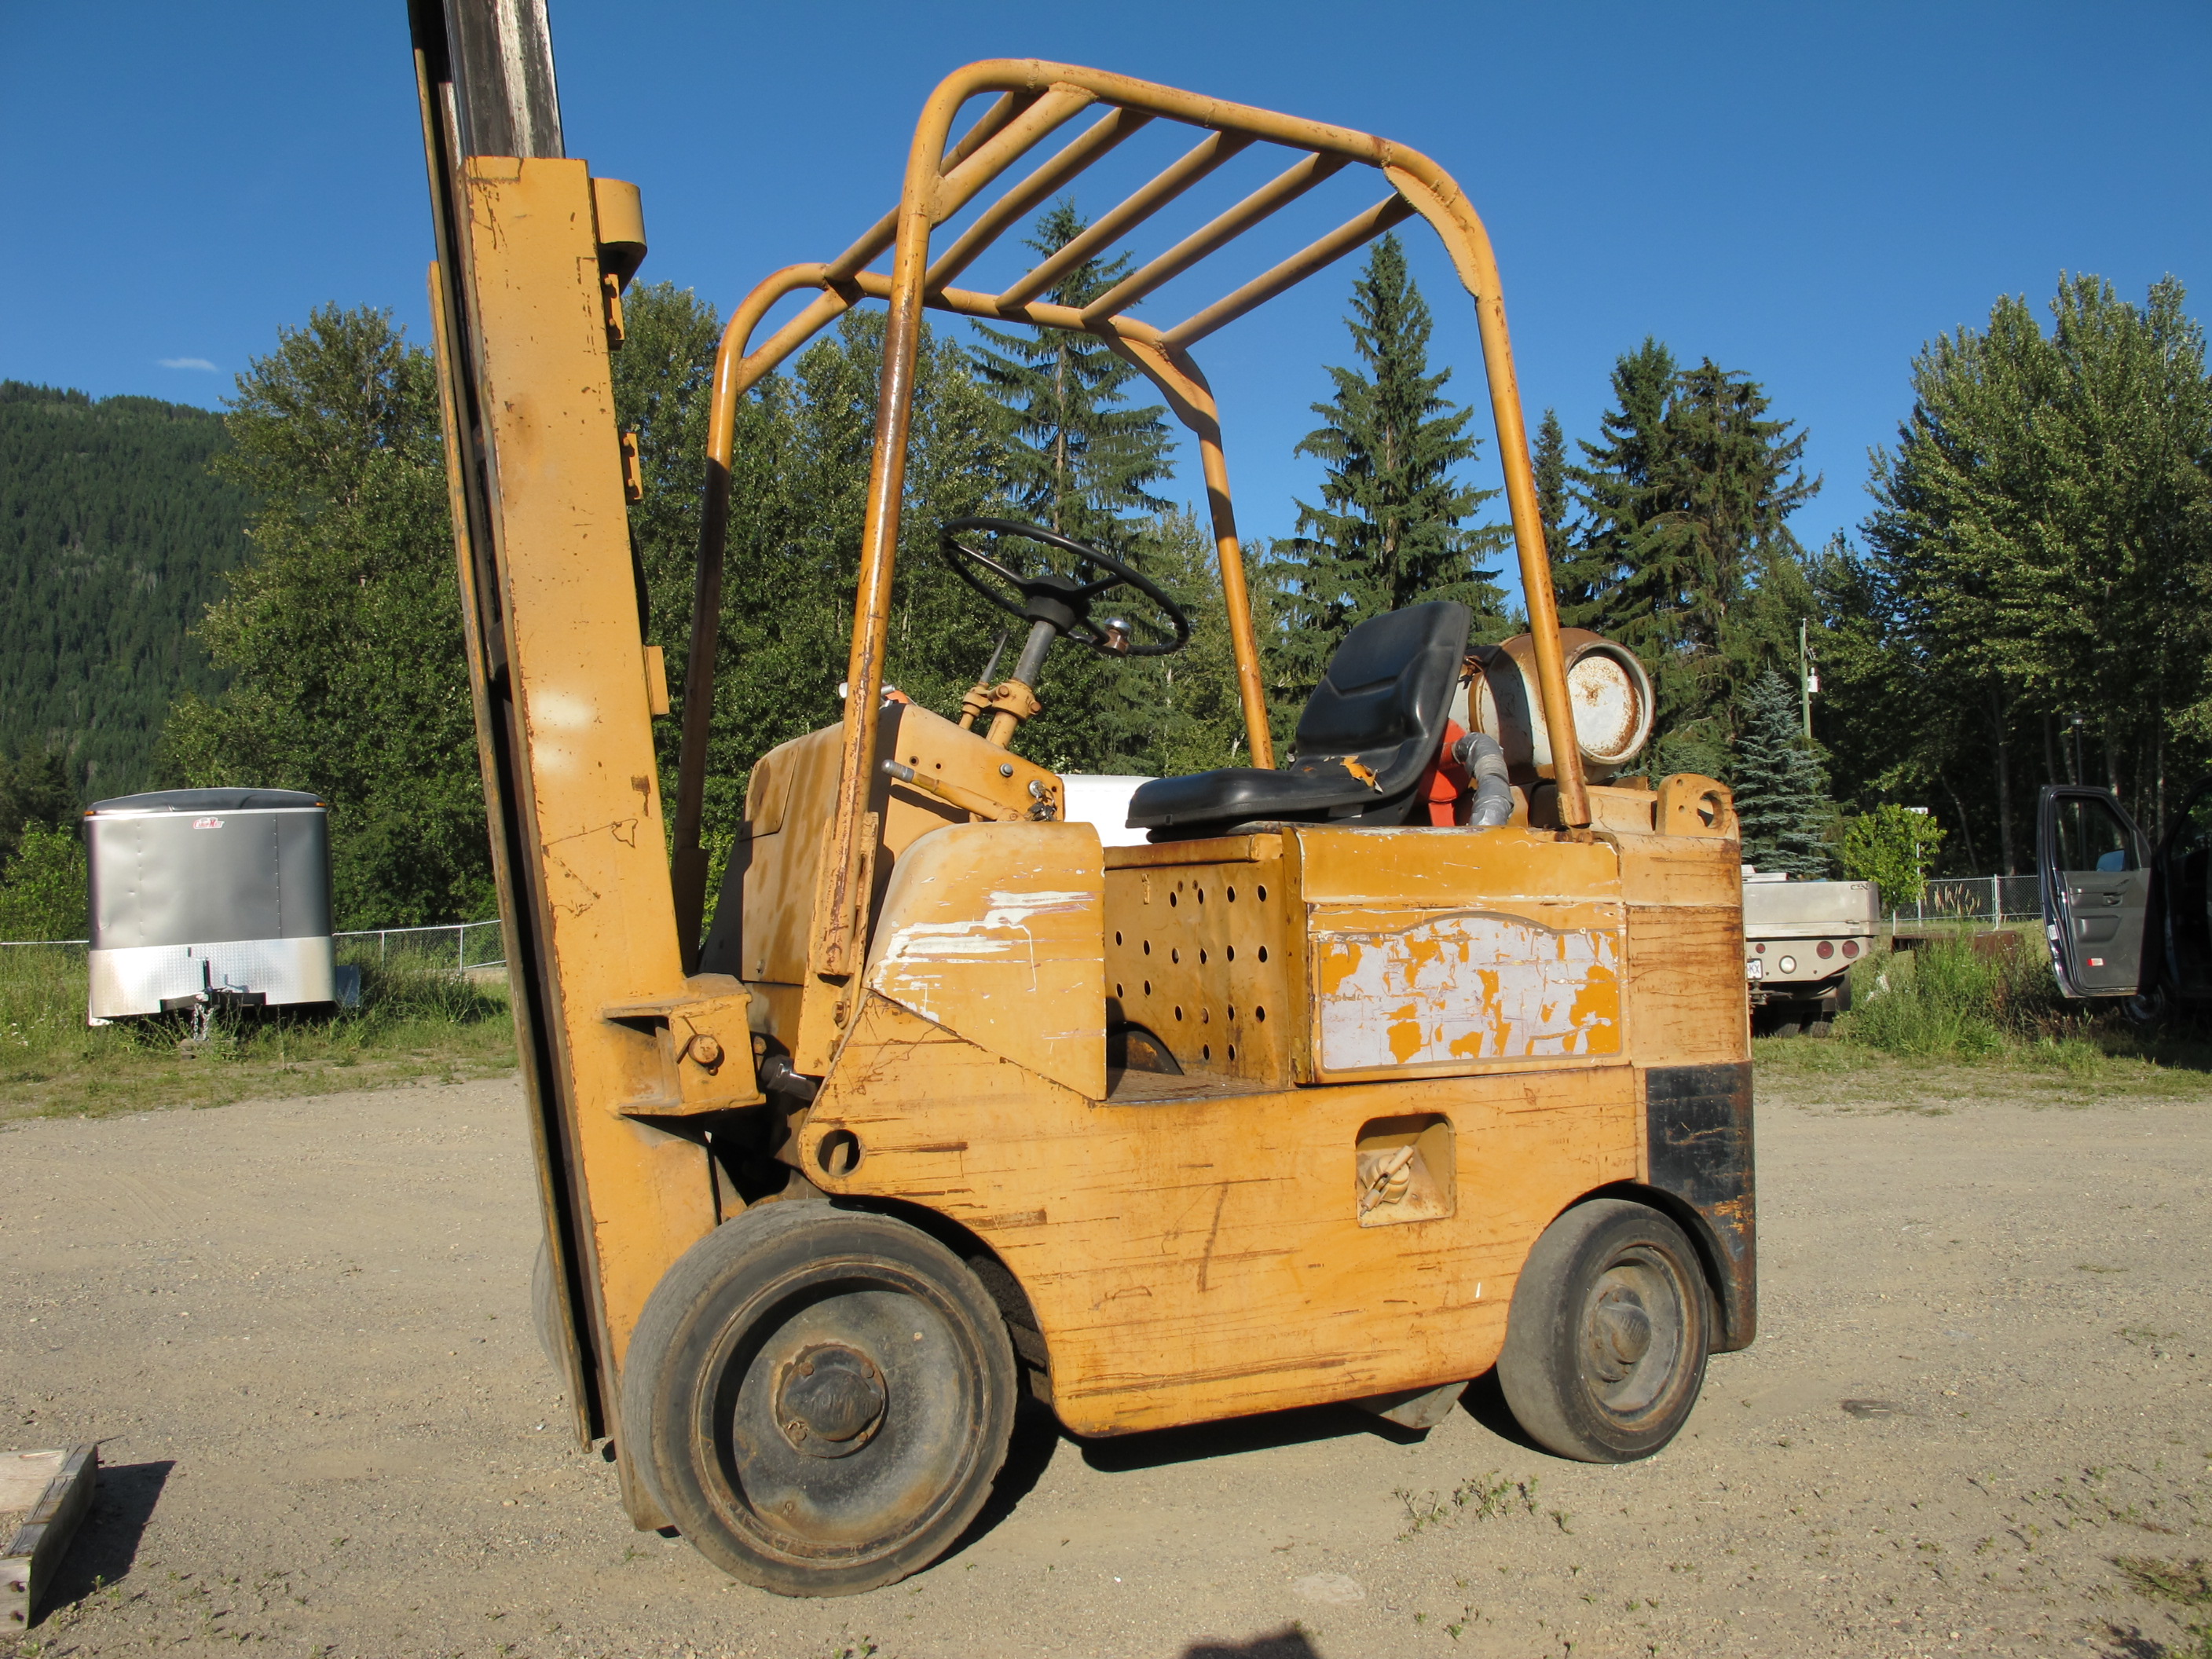 TOWMOTOR forklifts pictures and history